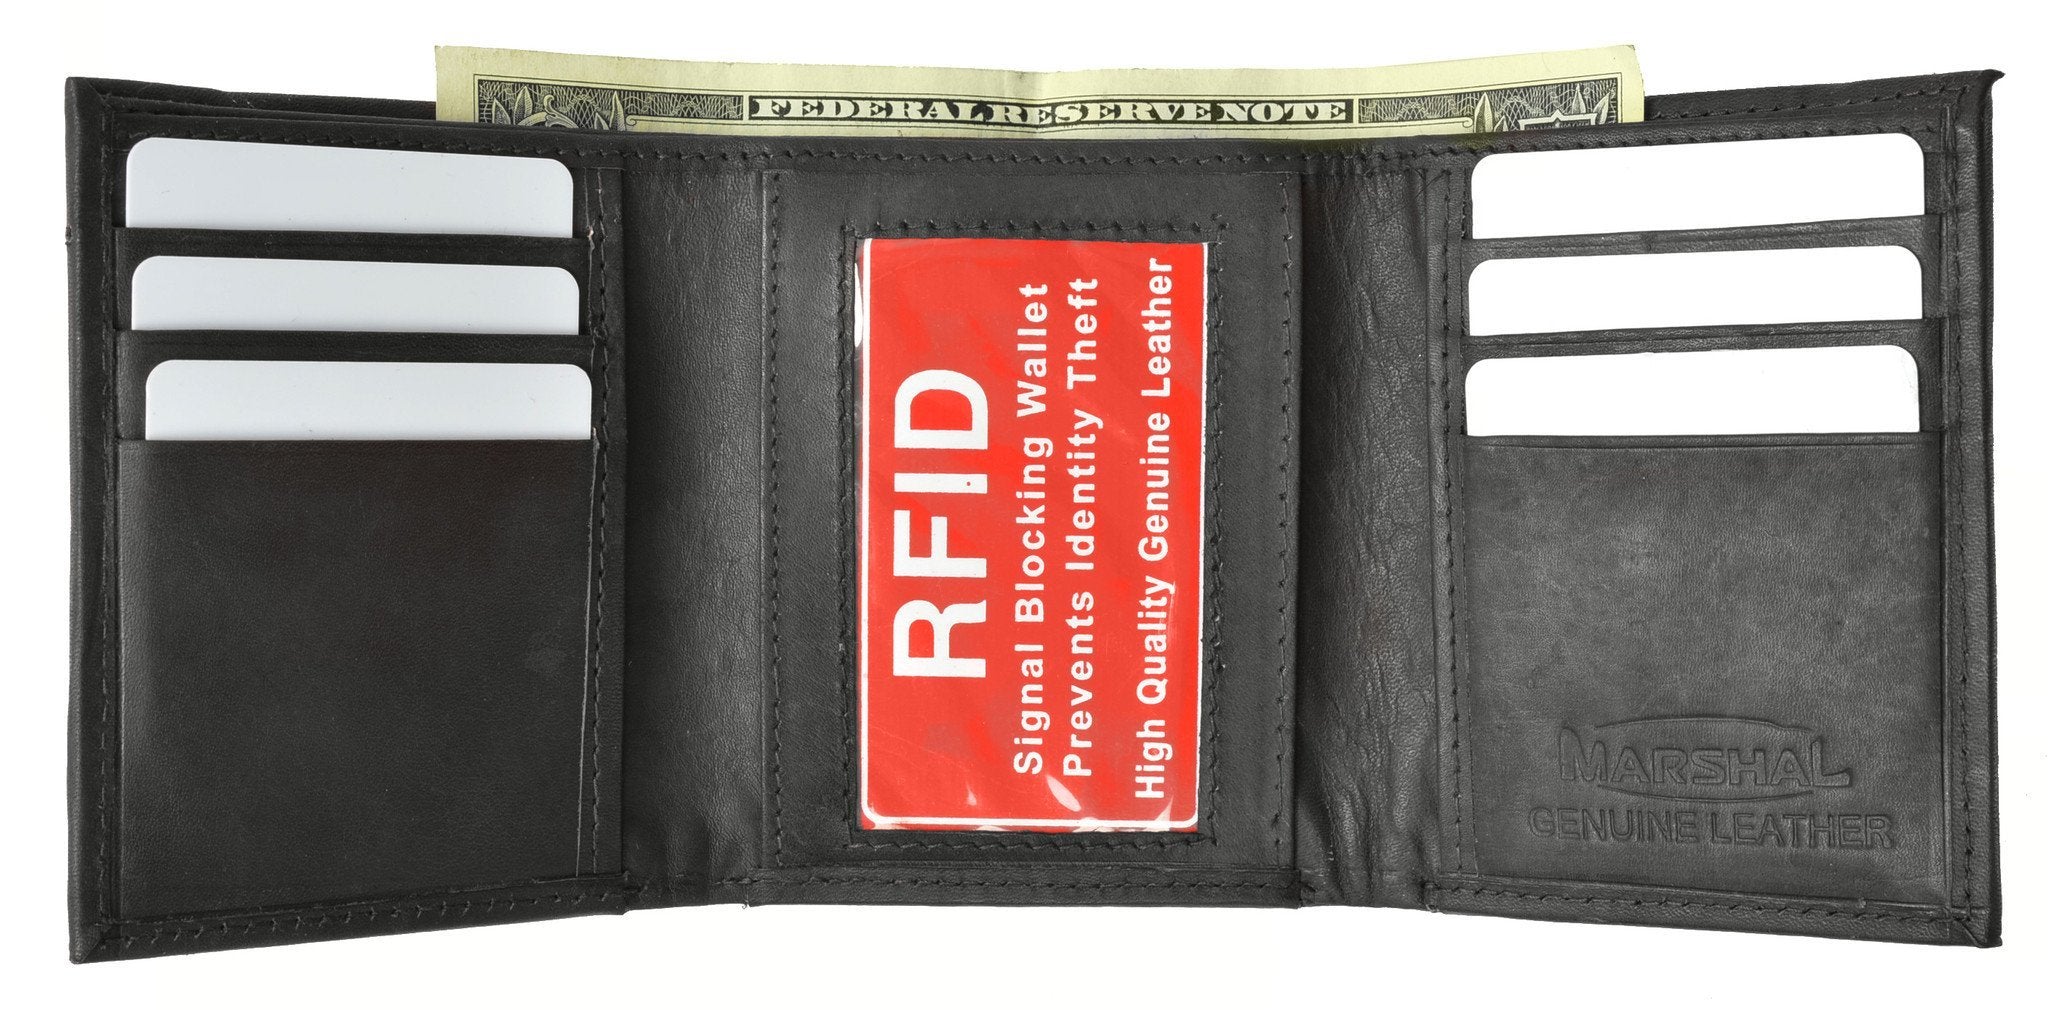 Mens Trifold Leather Wallet RFID Blocking